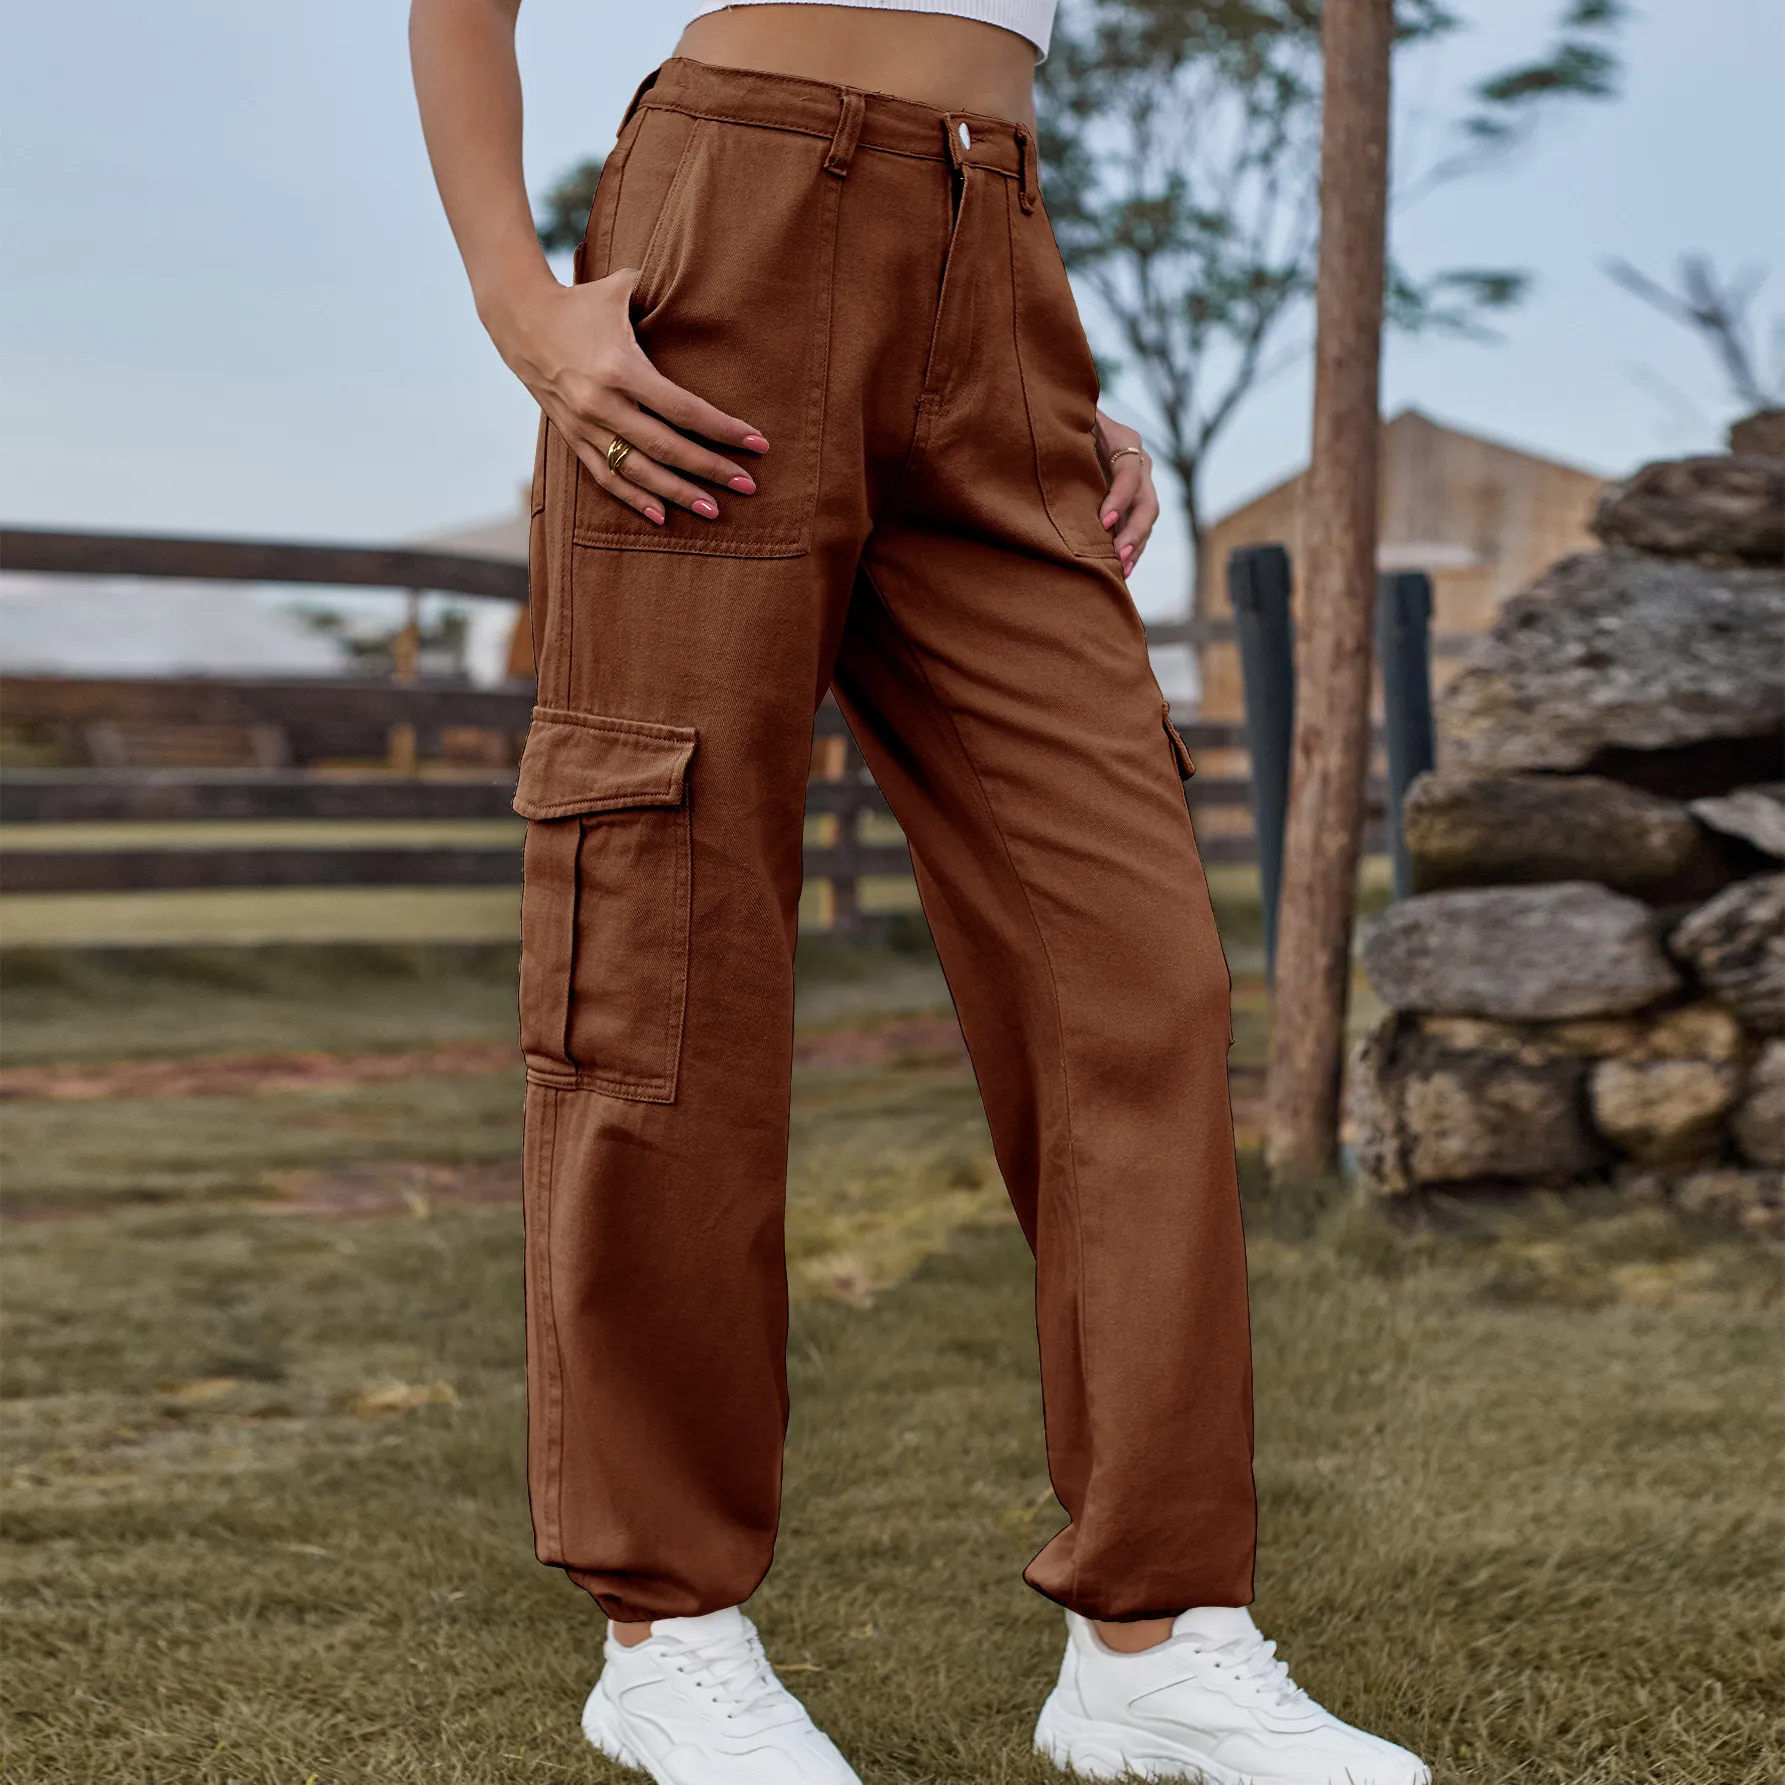 Womens High Waist Cargo Pants Slim Fit Casual Jogger Trousers with